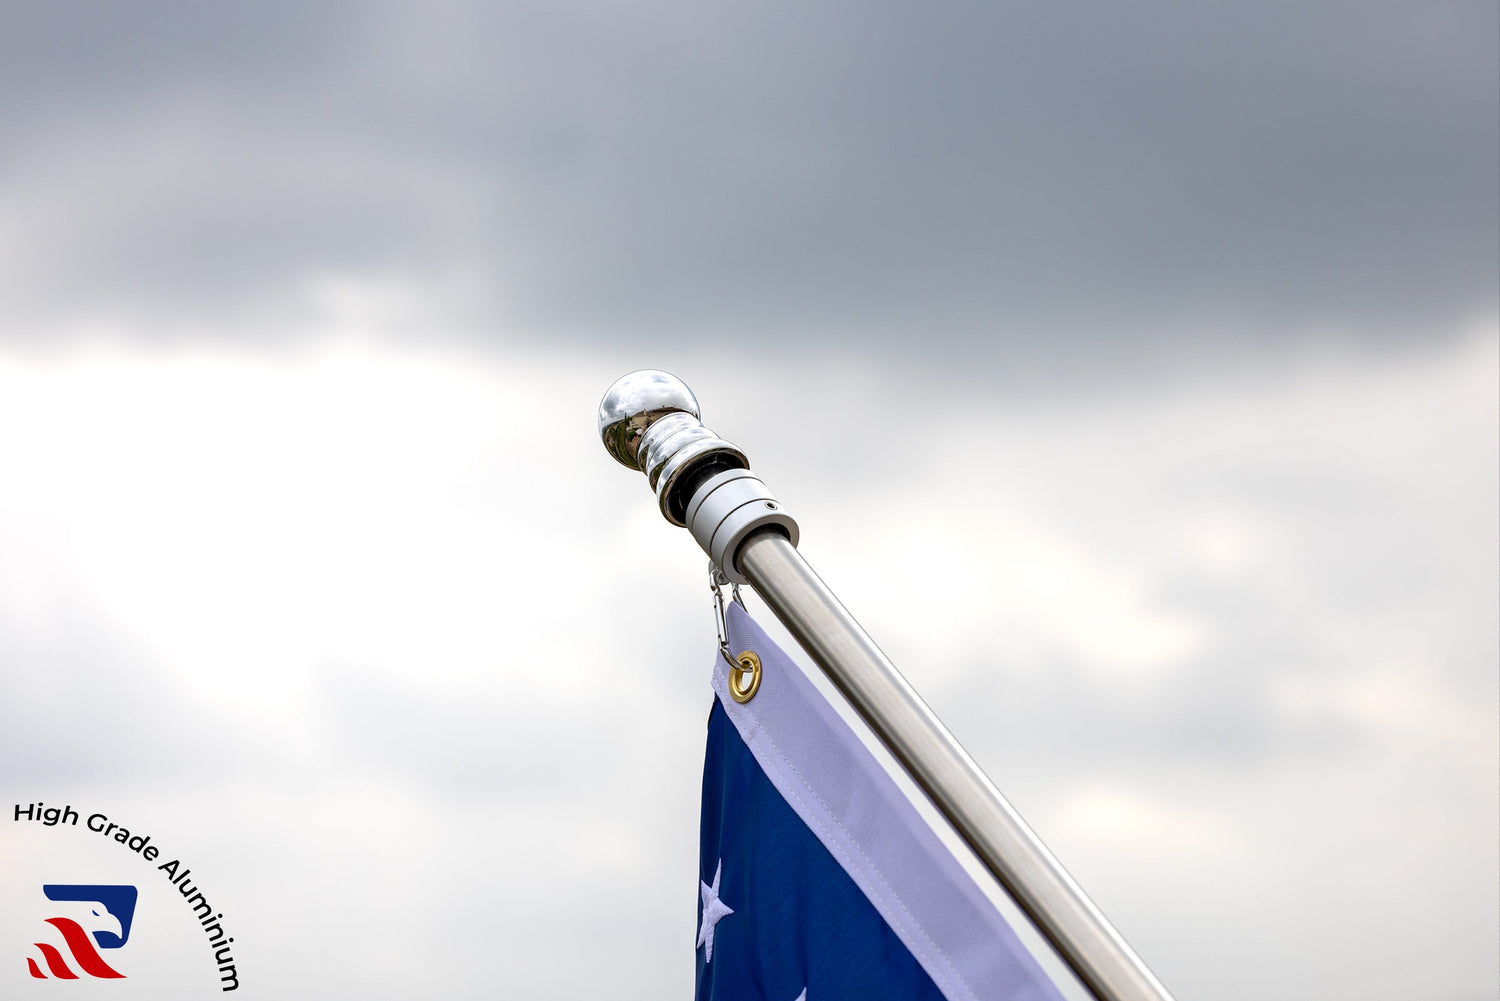 A close-up of a flagpole with a blue flag featuring white stars against a cloudy sky. There is a logo at the bottom left with the text "High Grade Aluminium, Made in USA.